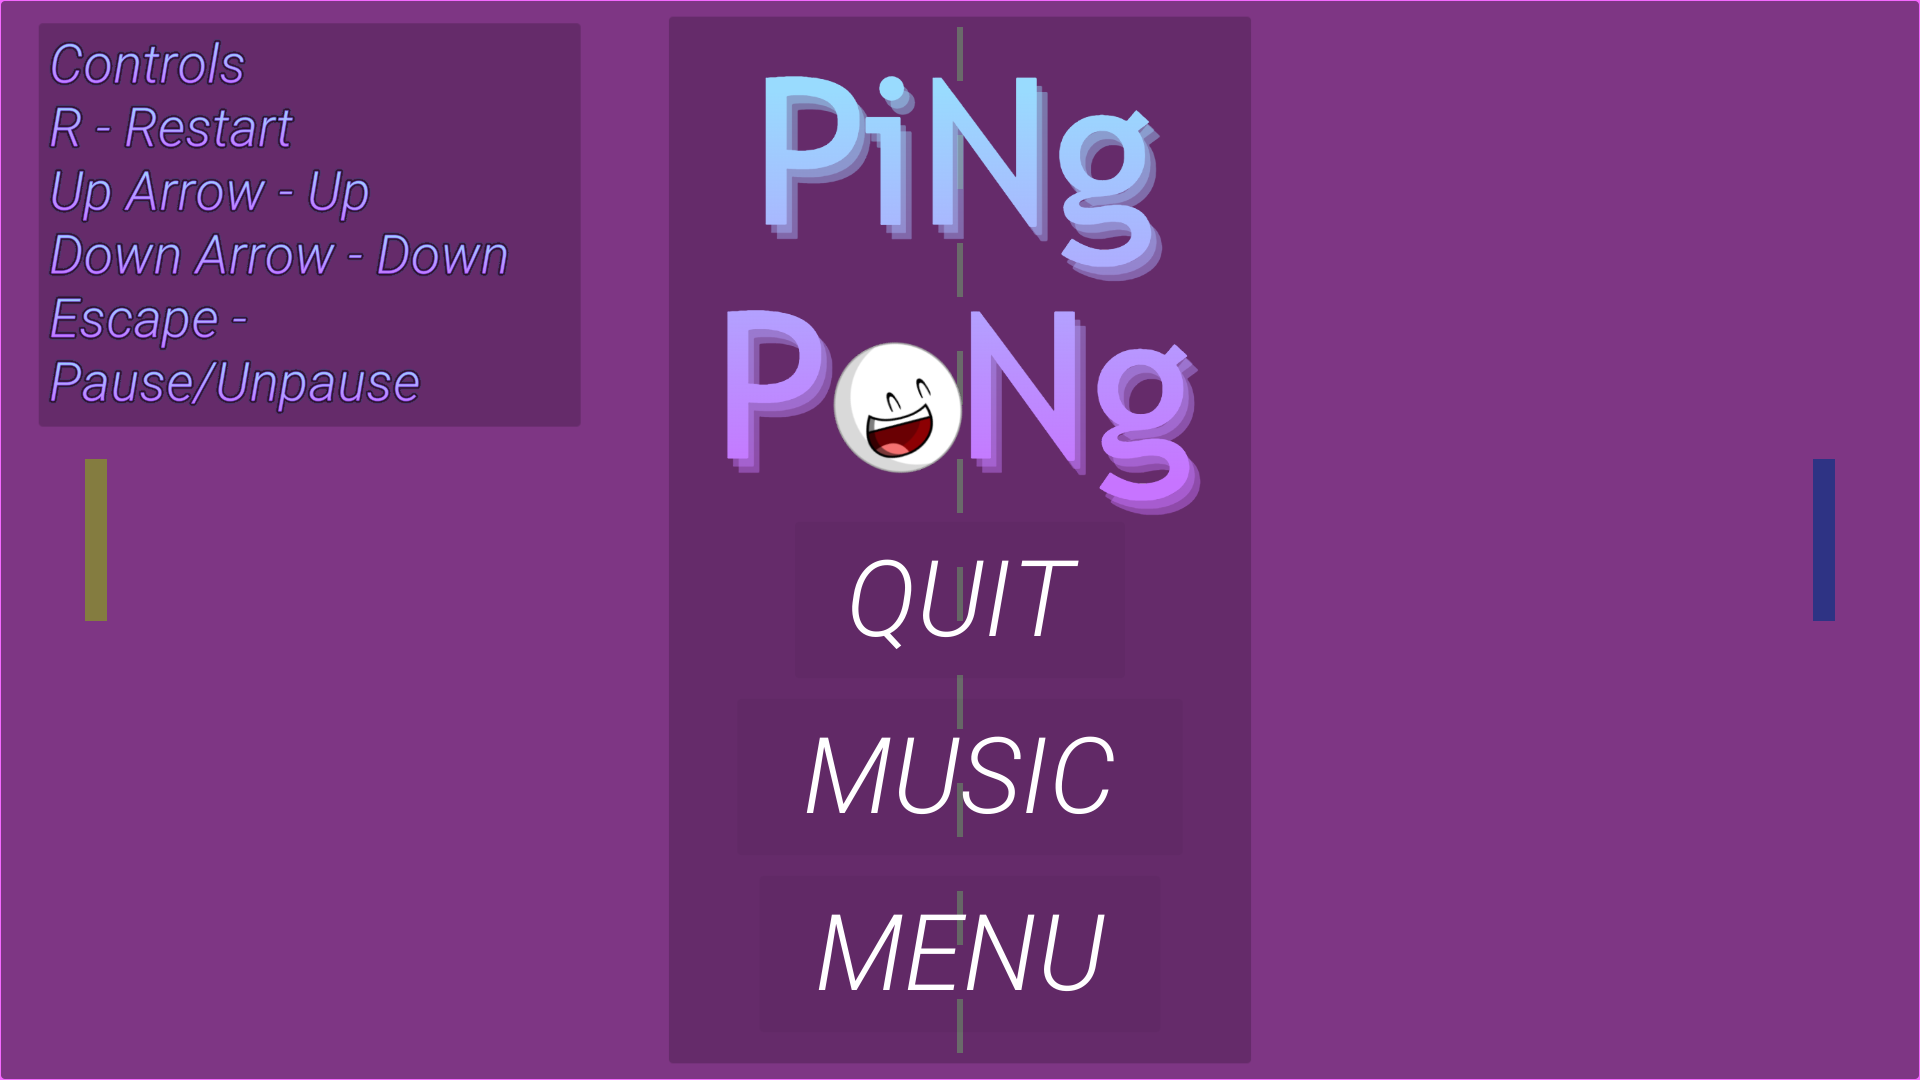 PiNg PoNg by TeamHarveyGames